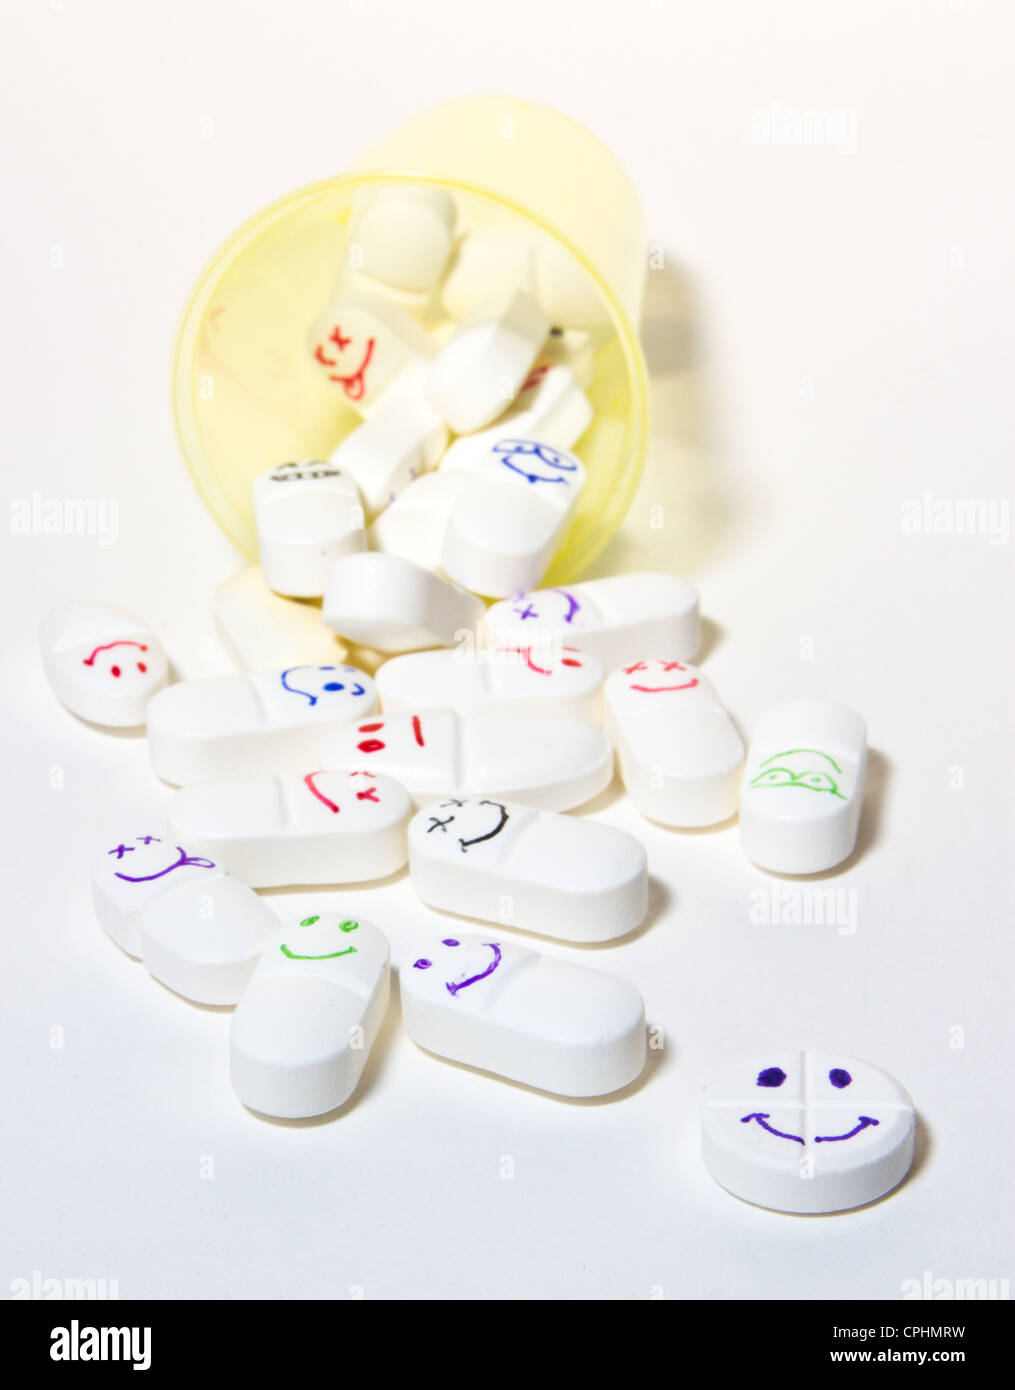 smiley face pills in a cup Stock Photo